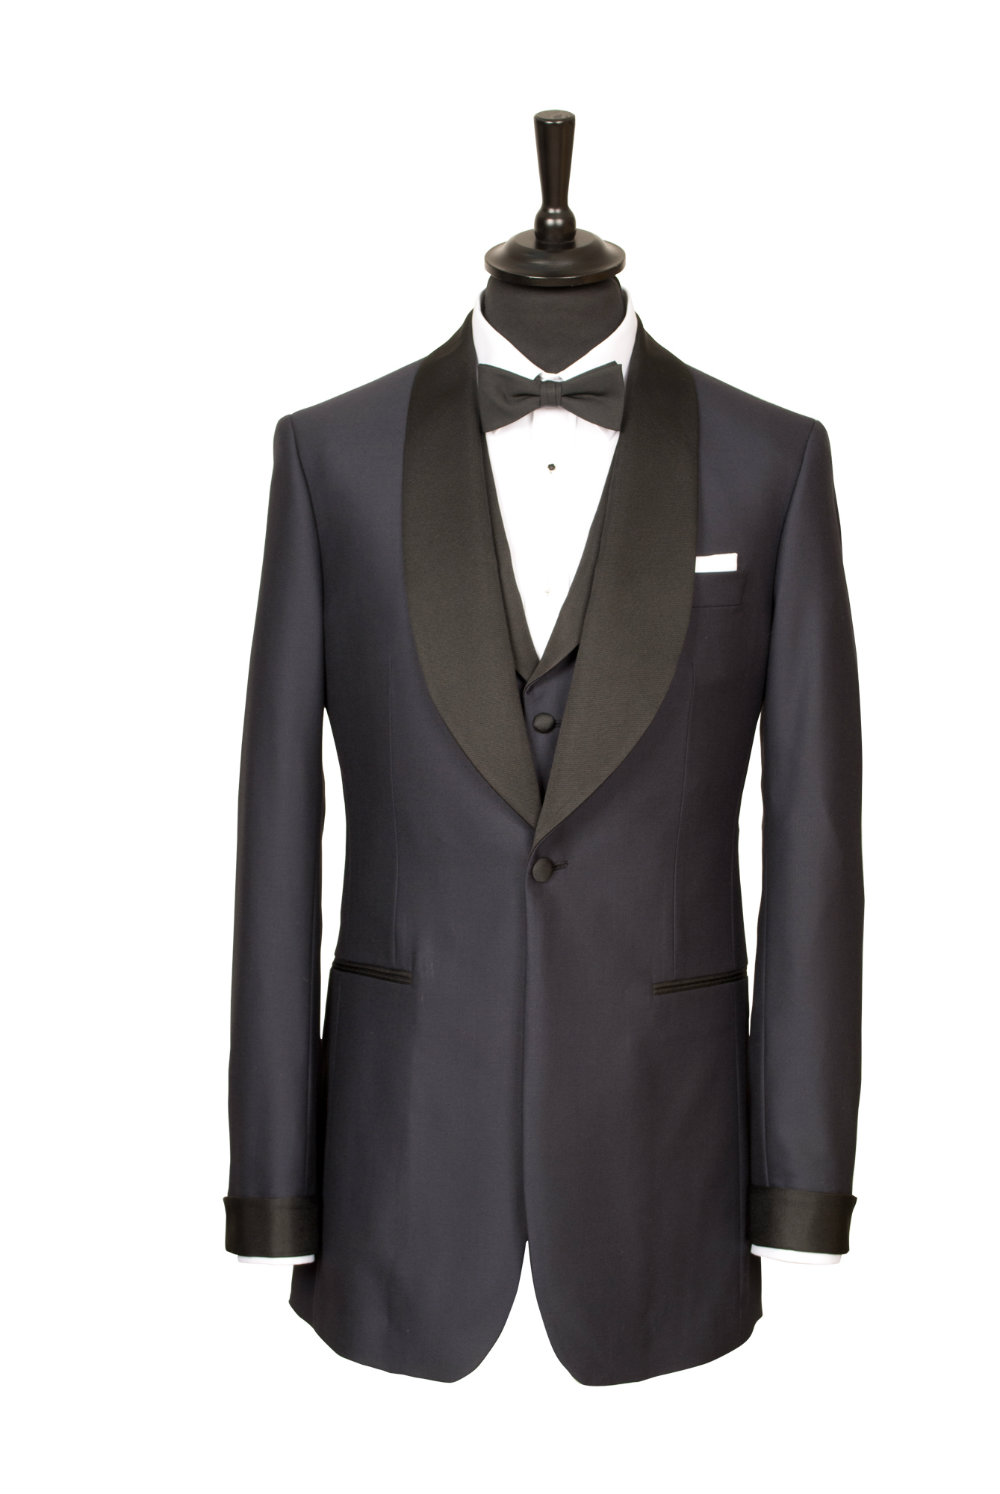 A Short History of the Dinner Suit